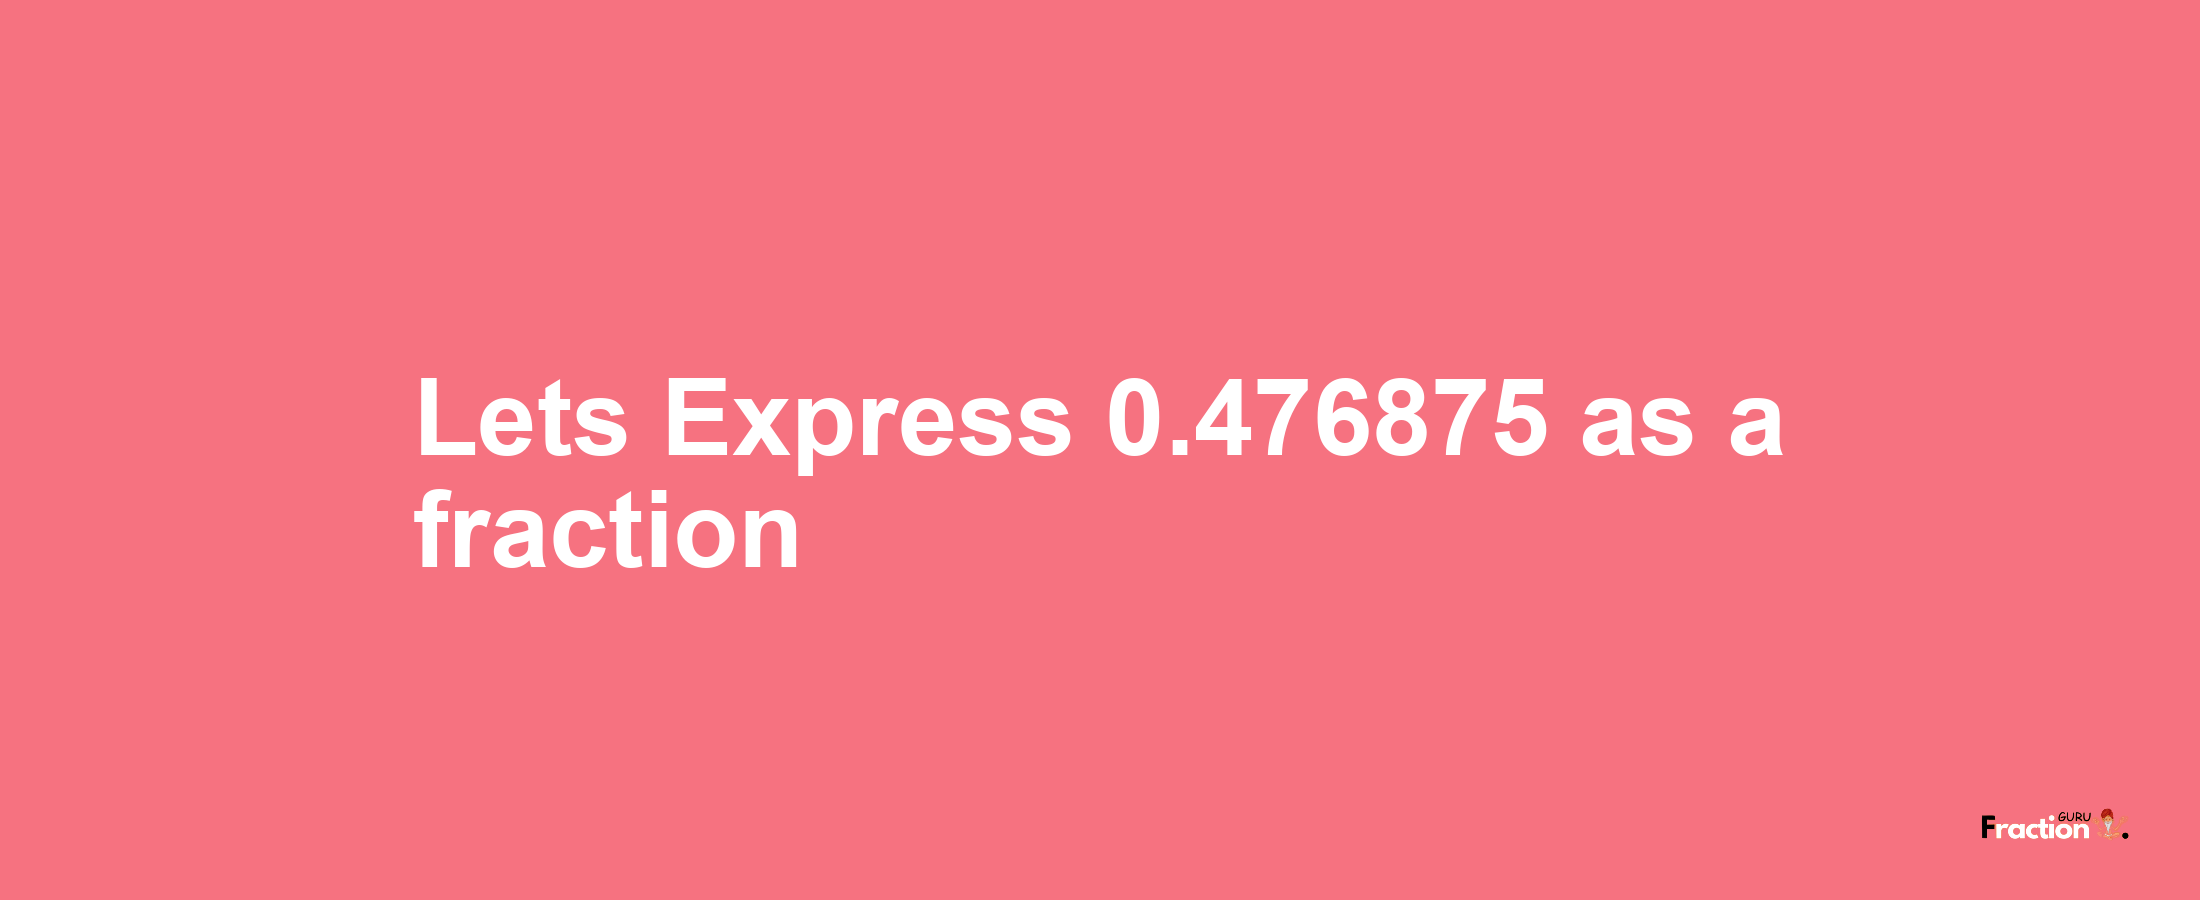 Lets Express 0.476875 as afraction